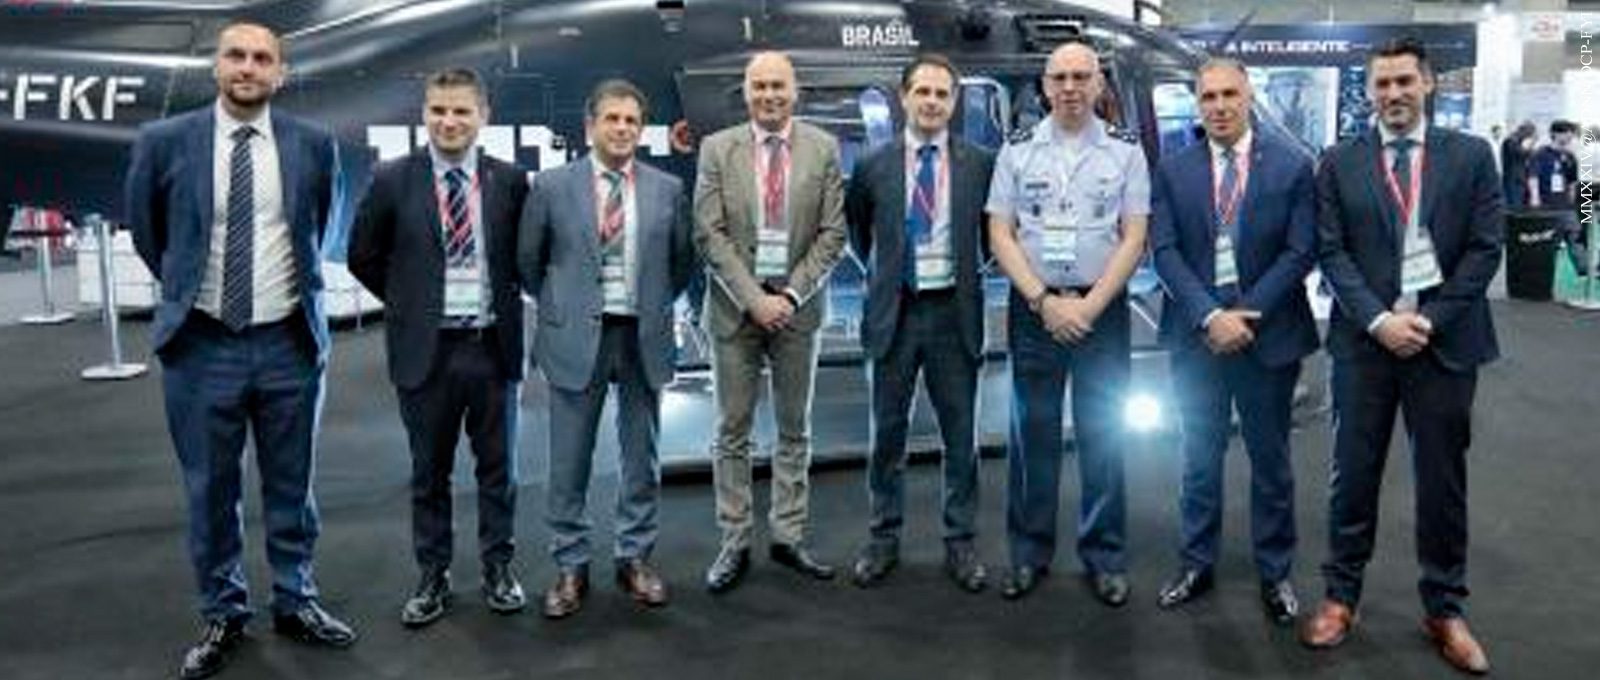 Brazilian Air Force Commander attends LAAD Security and Defense 2024